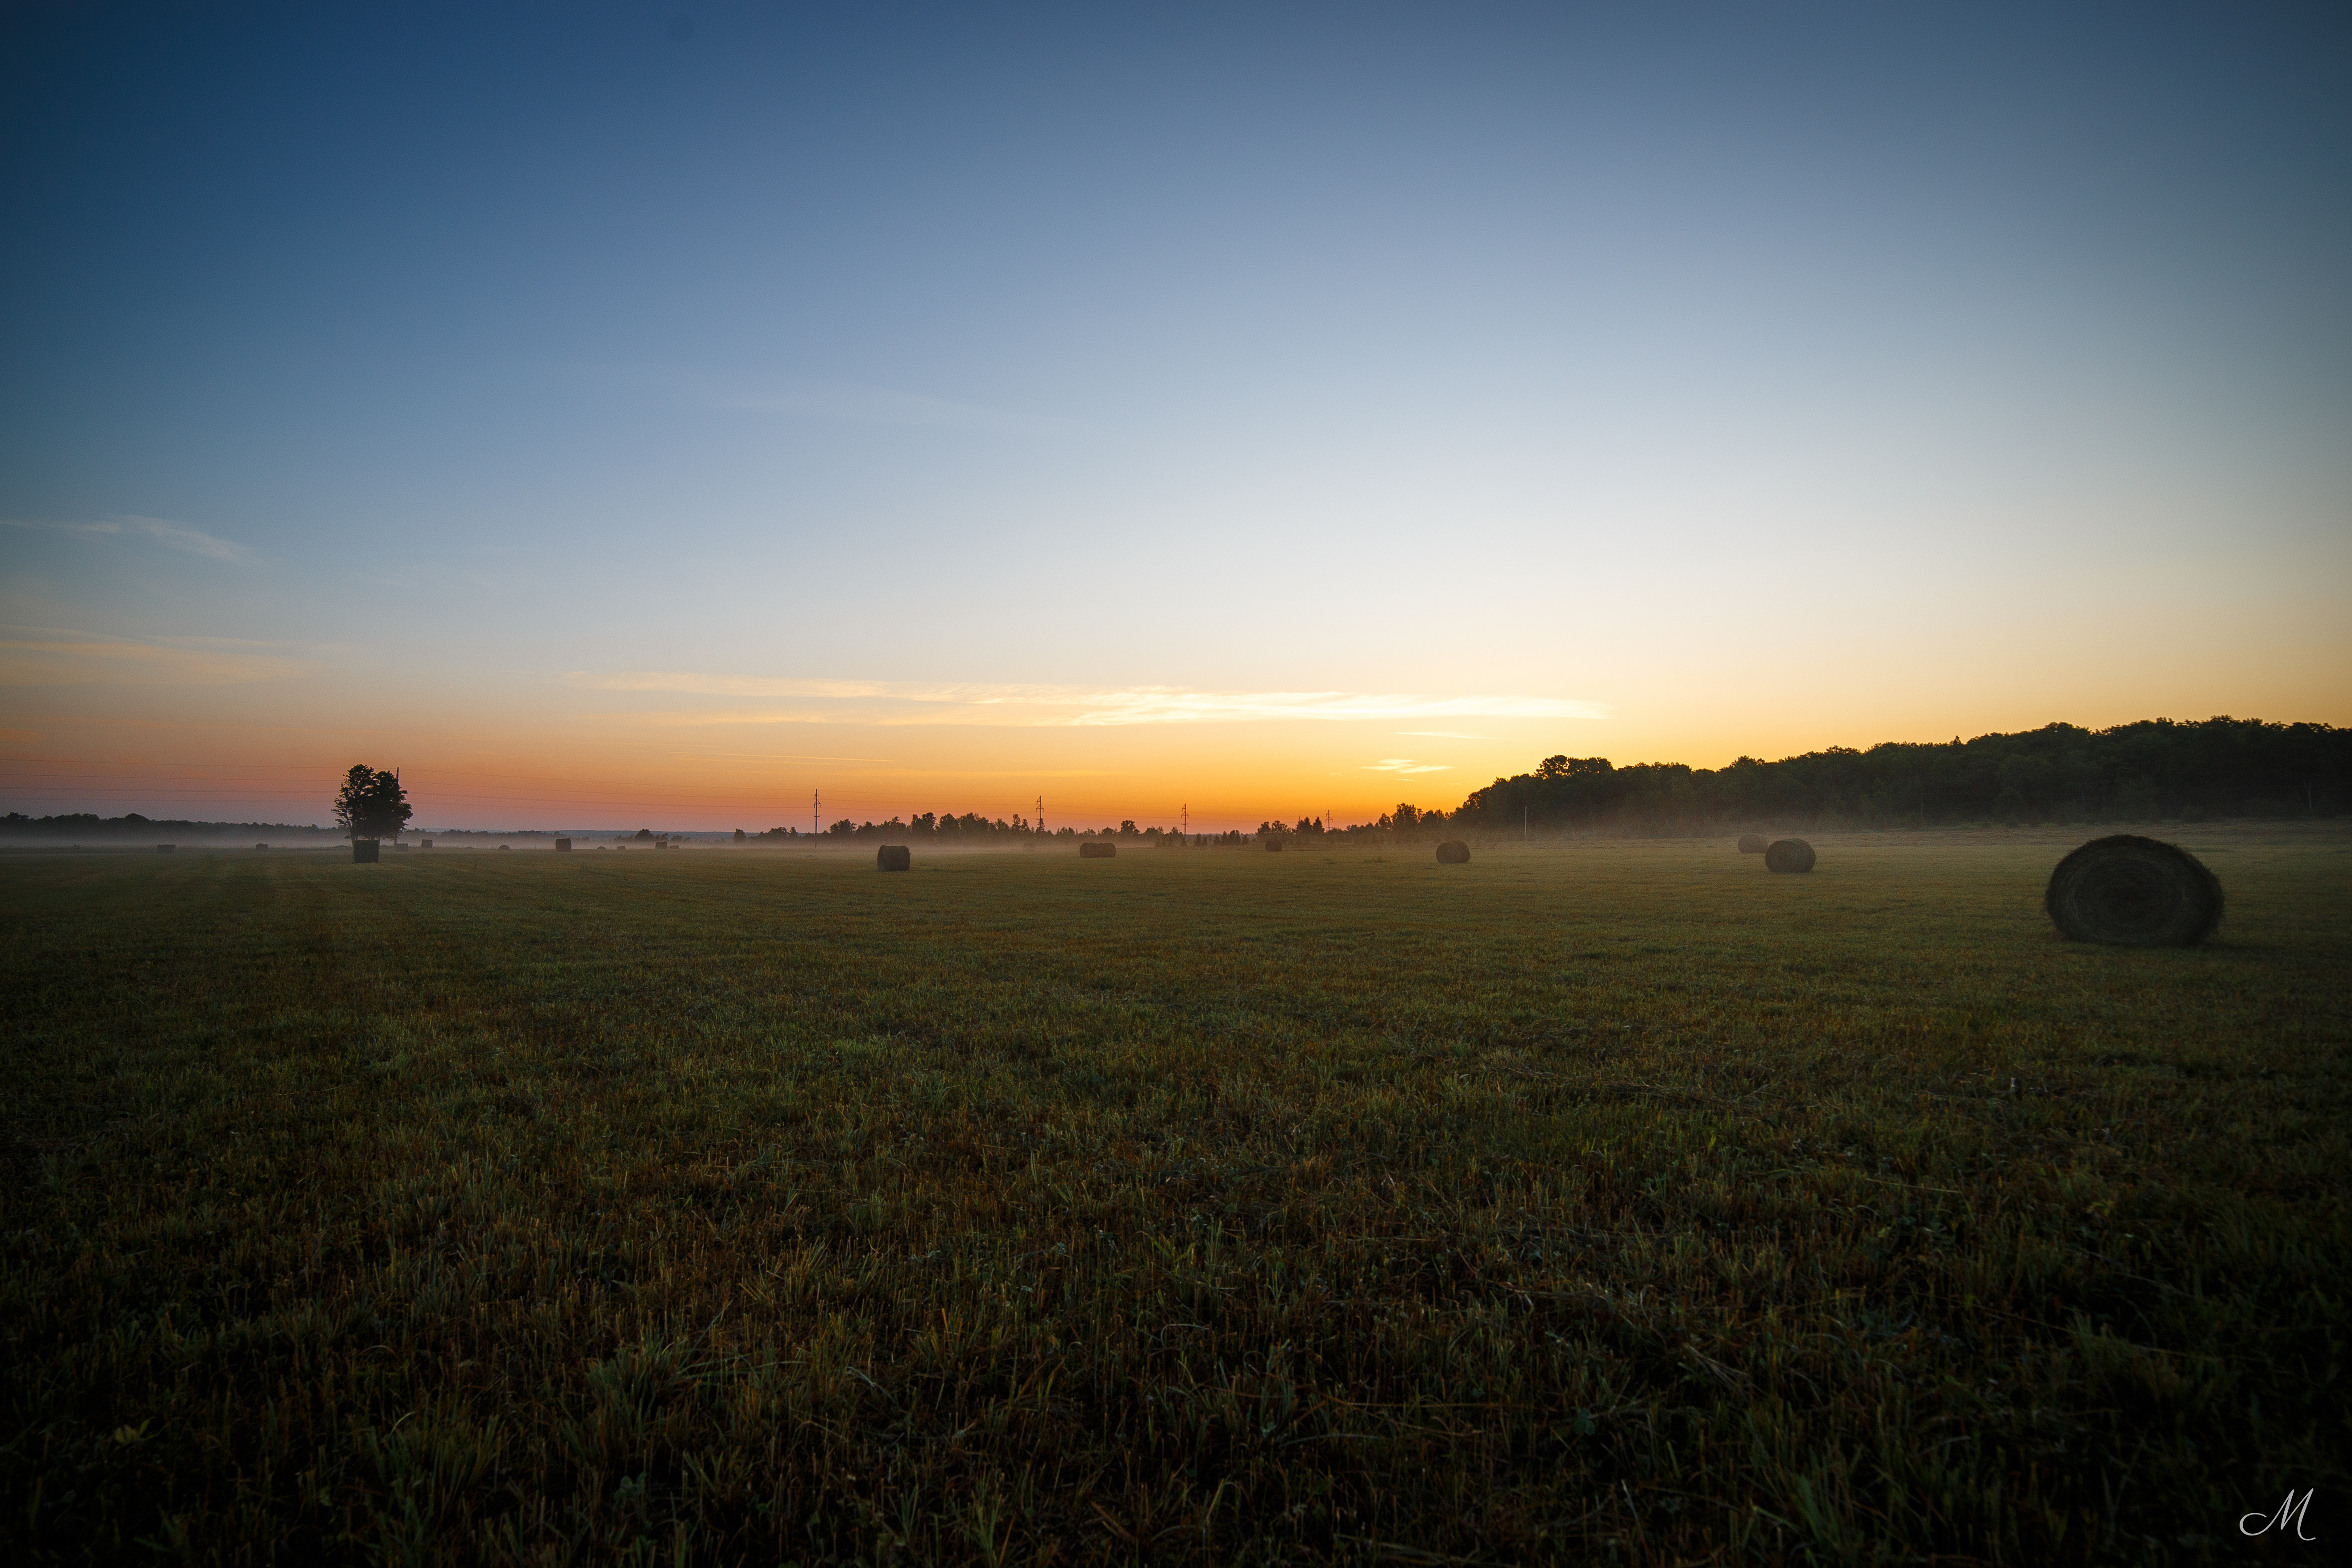 A foggy morning sunrise looking over our fields and woods where our Llewellins will soon be running!